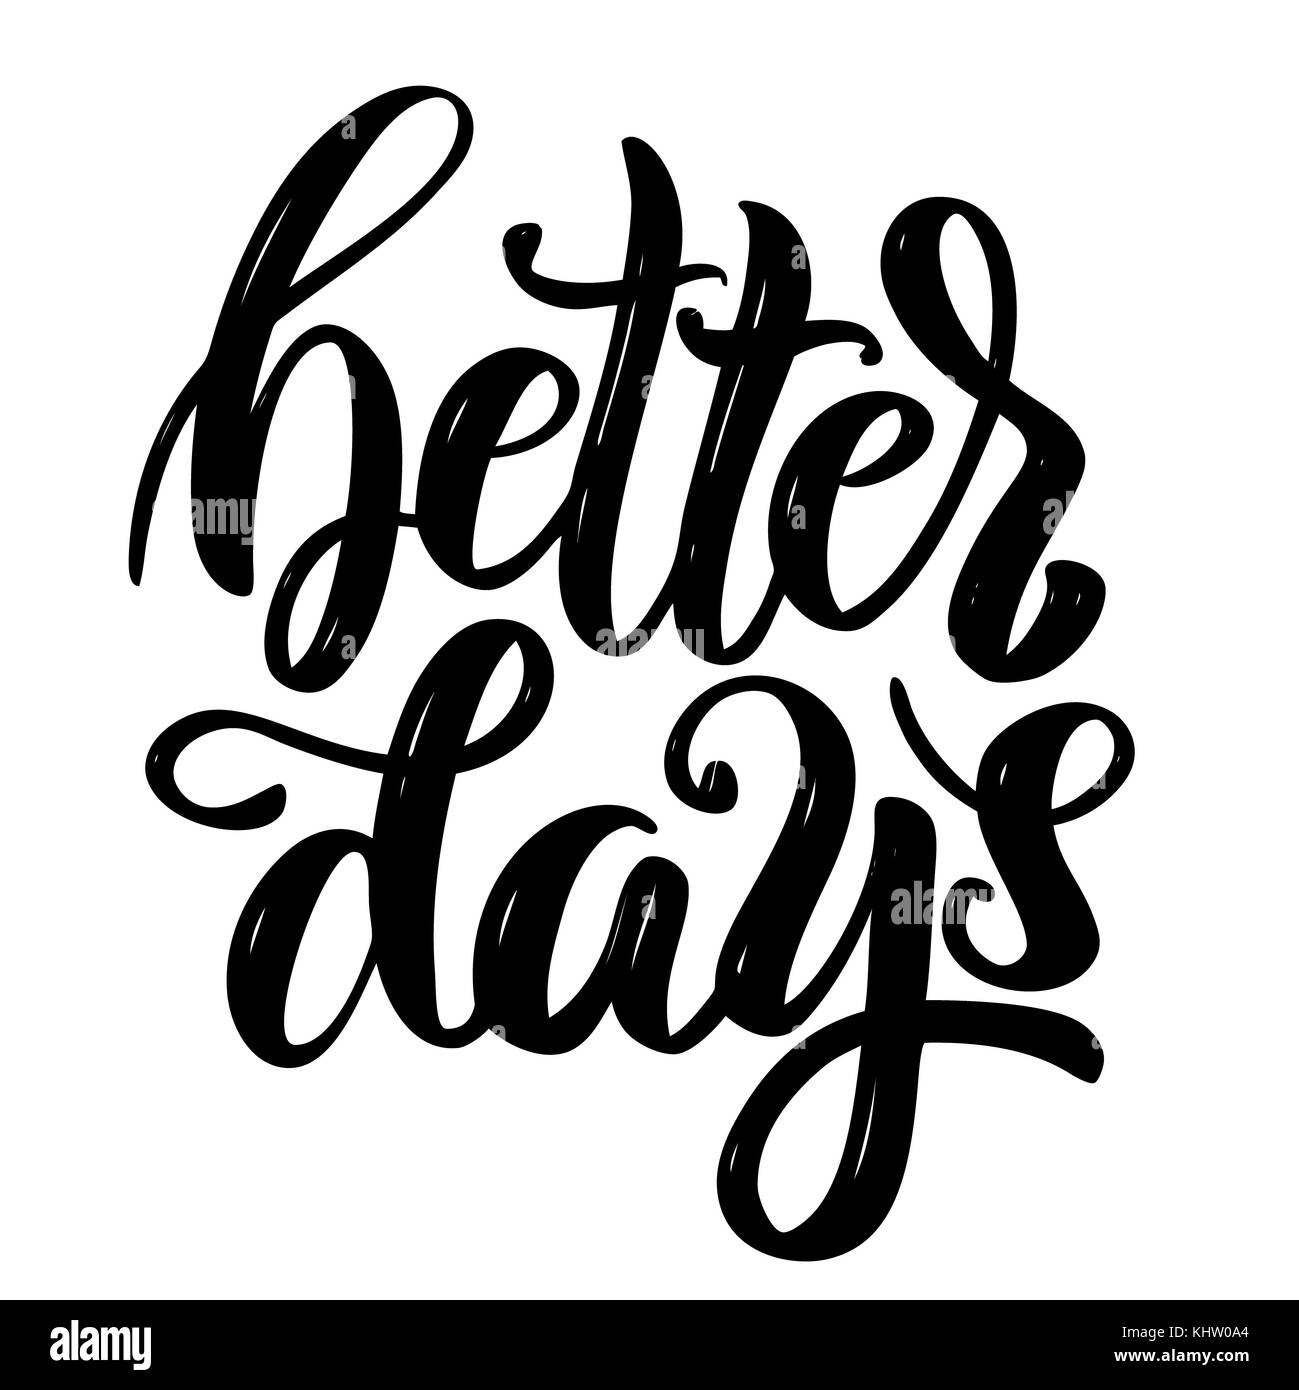 Better days. Hand drawn motivation lettering quote. Design element for poster, banner, greeting card. Vector illustration Stock Photo